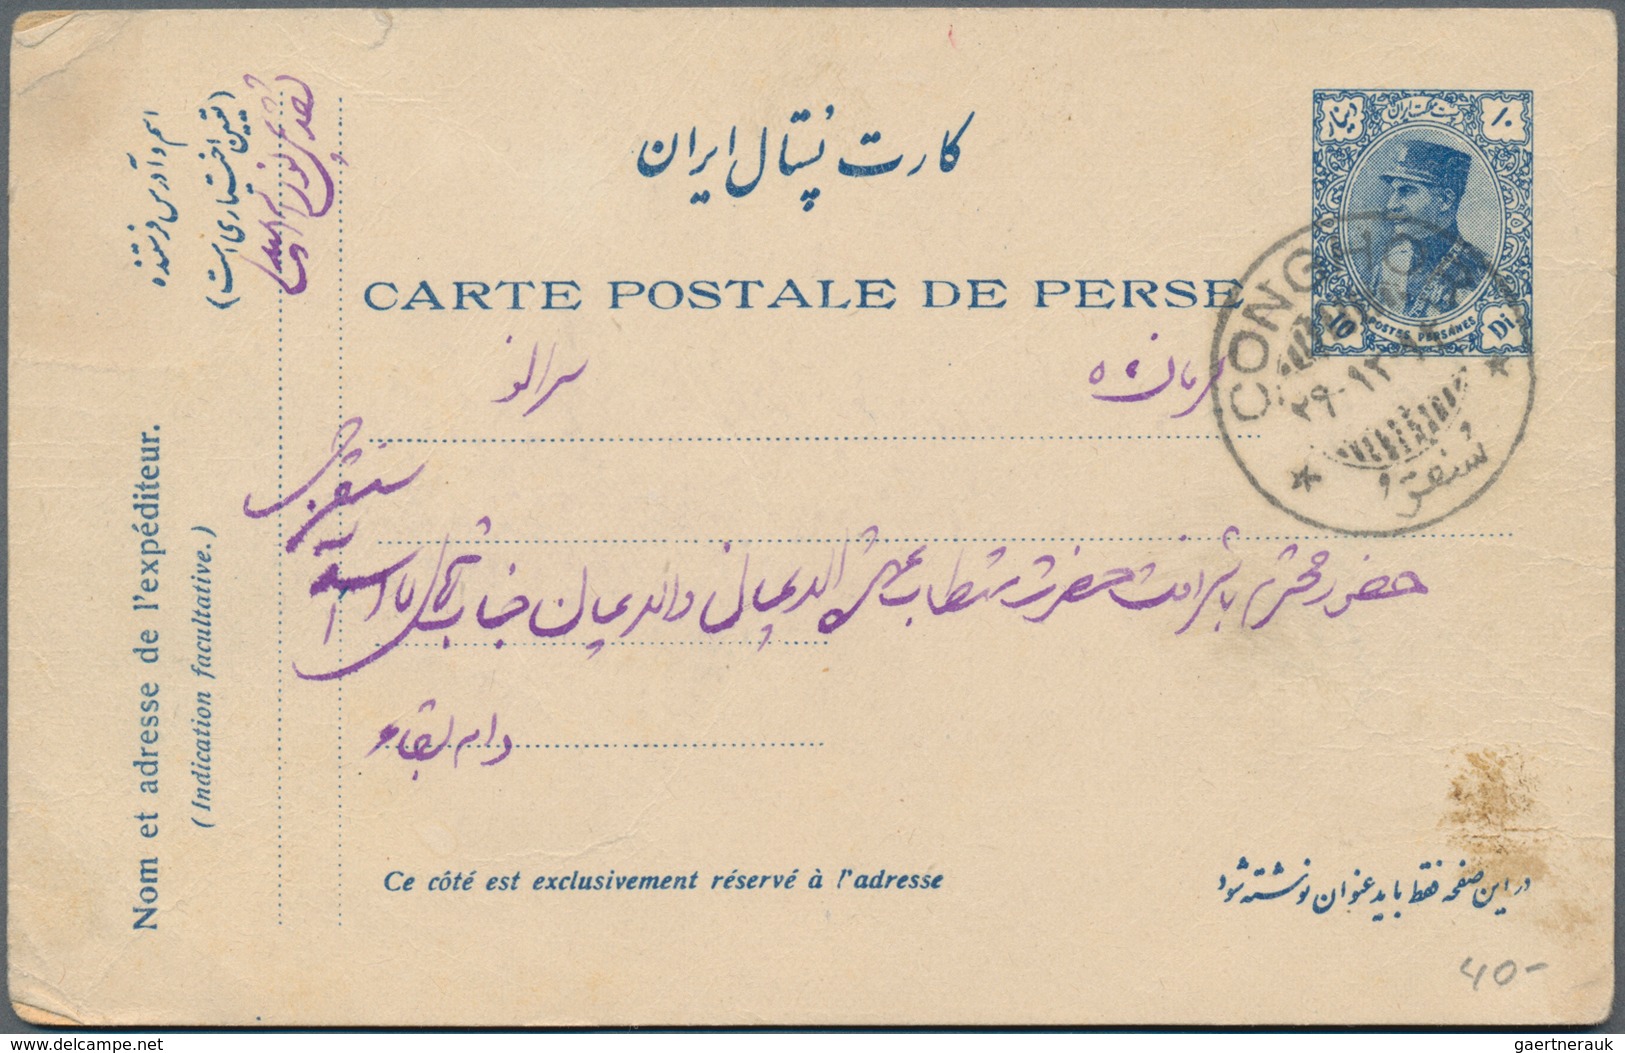 Iran: 1930-75, 24 Covers & Cards With Attractive Frankings, Many Air Mails, Fine Group - Irán